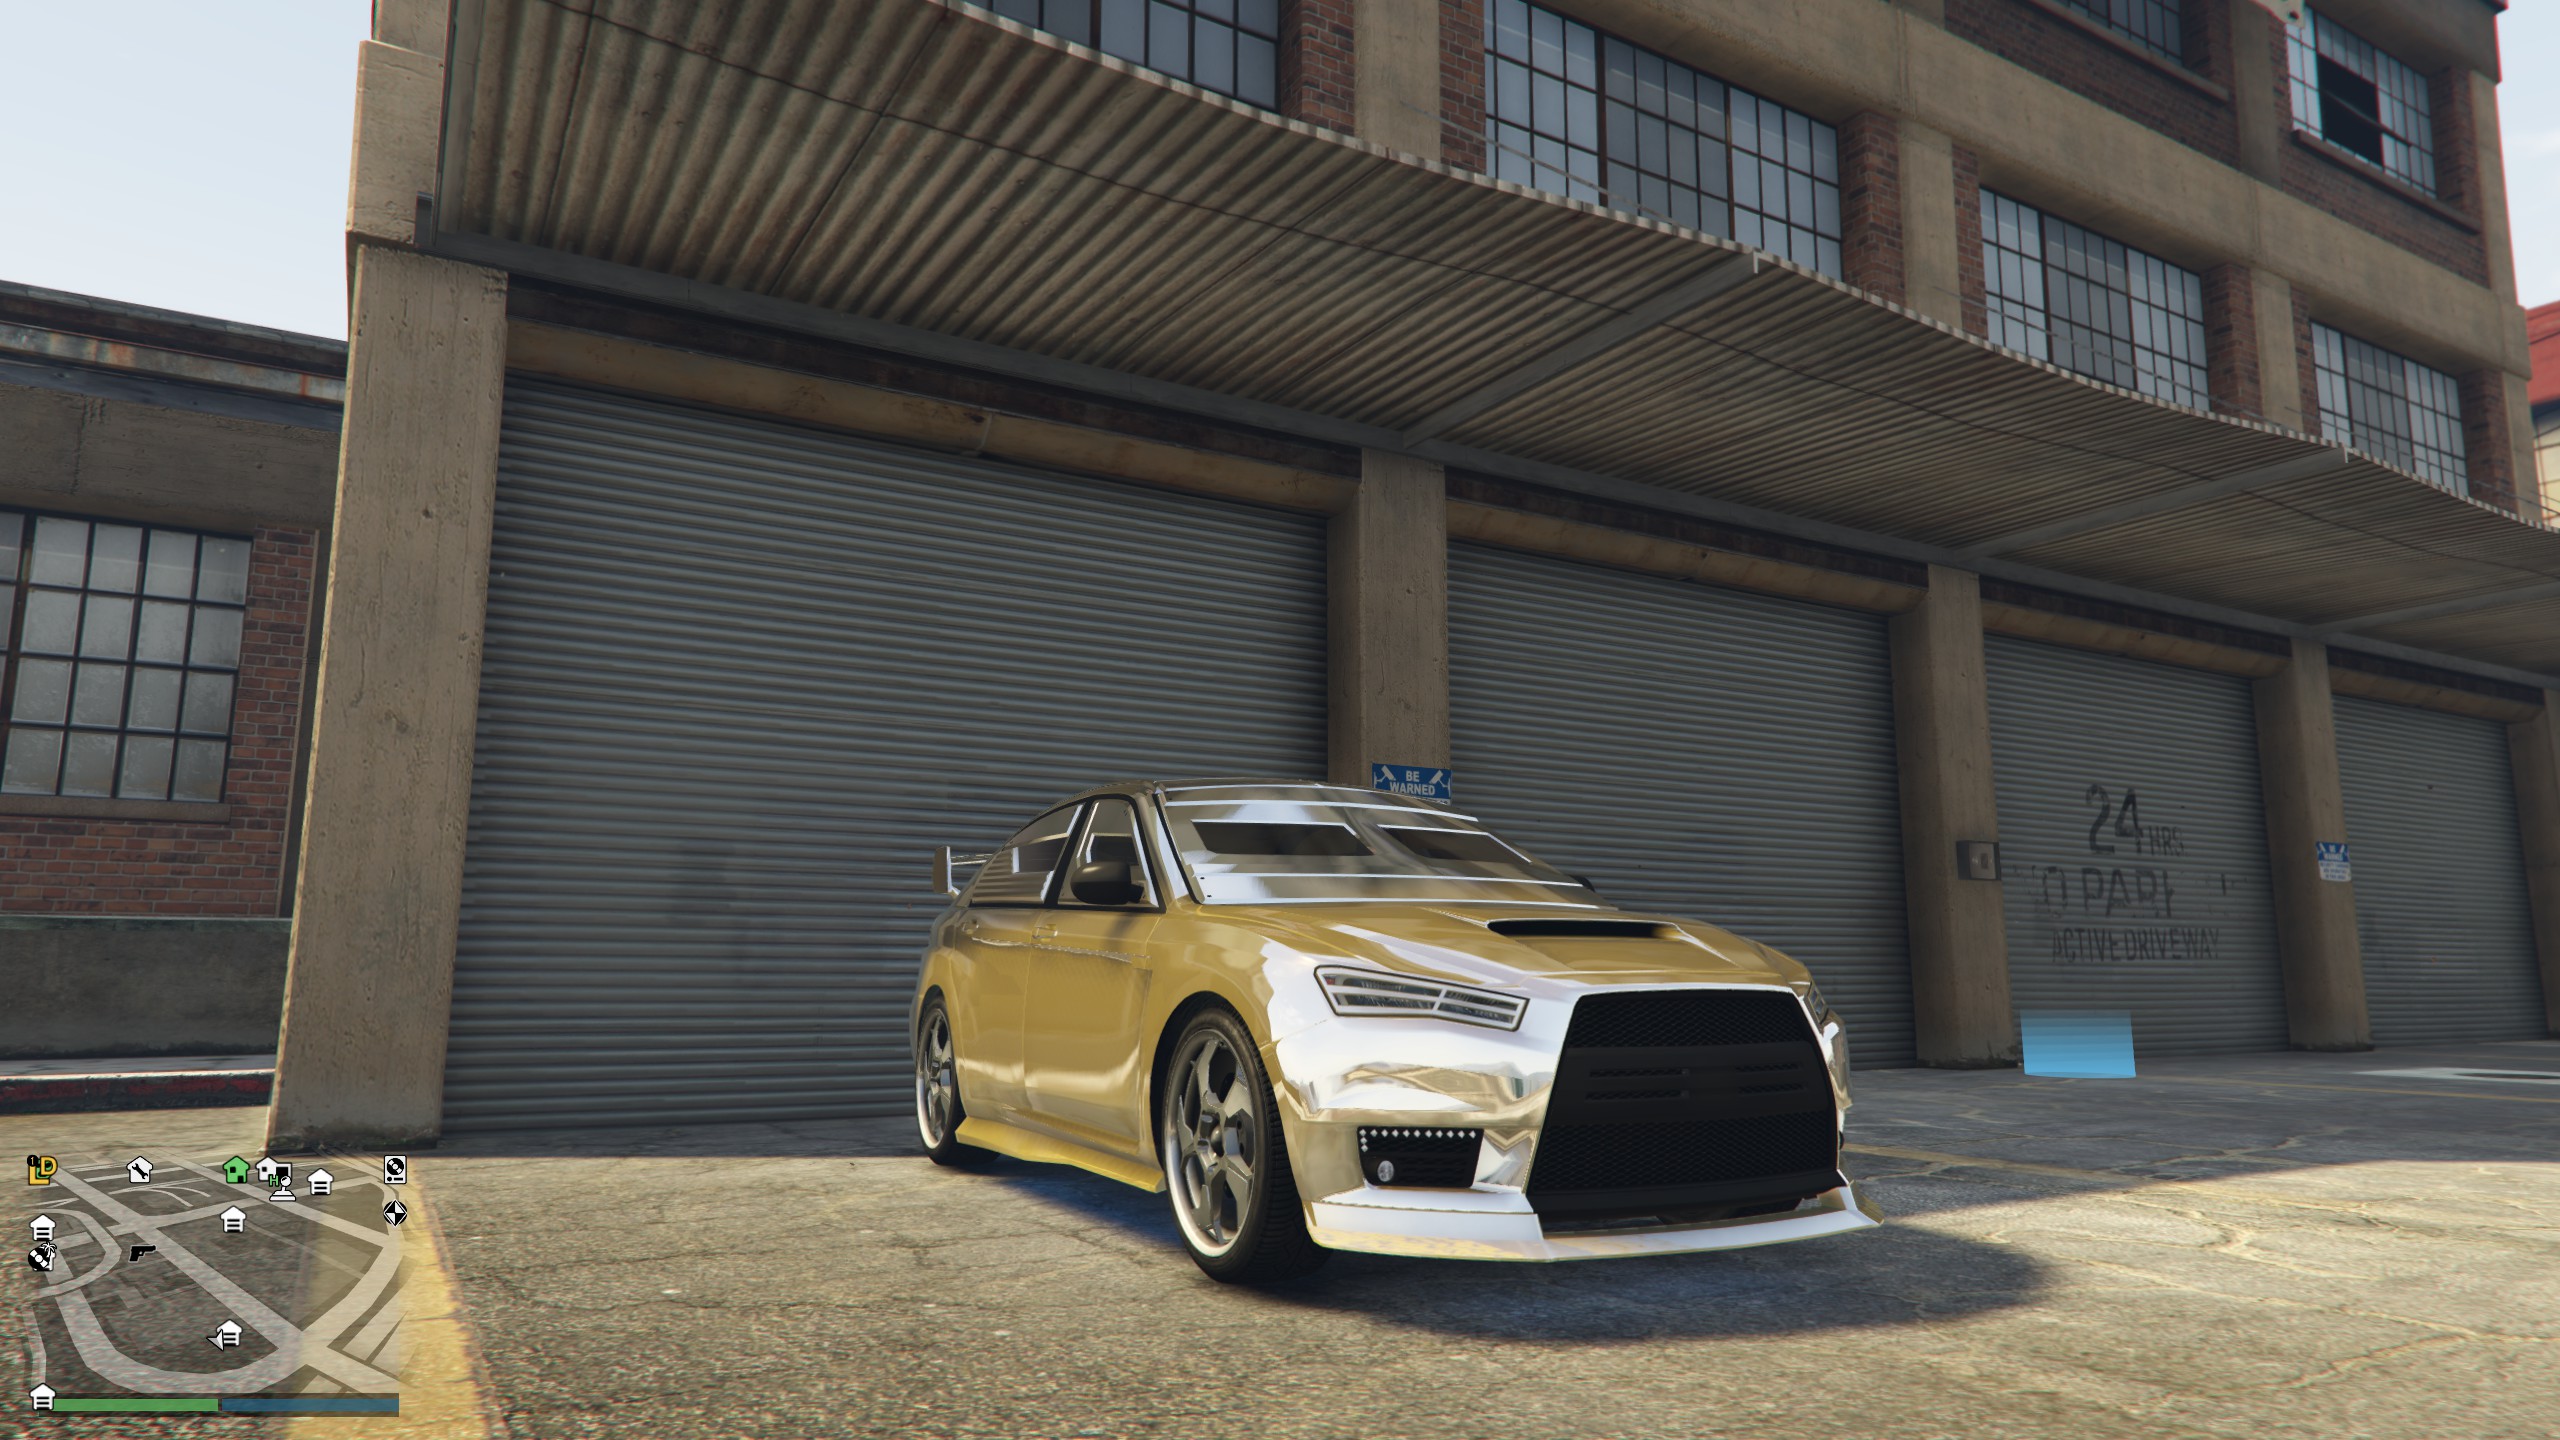 Grand Theft Auto V - Paint your cars GOLD CHROME Tips - Some Examples - 9262A3C